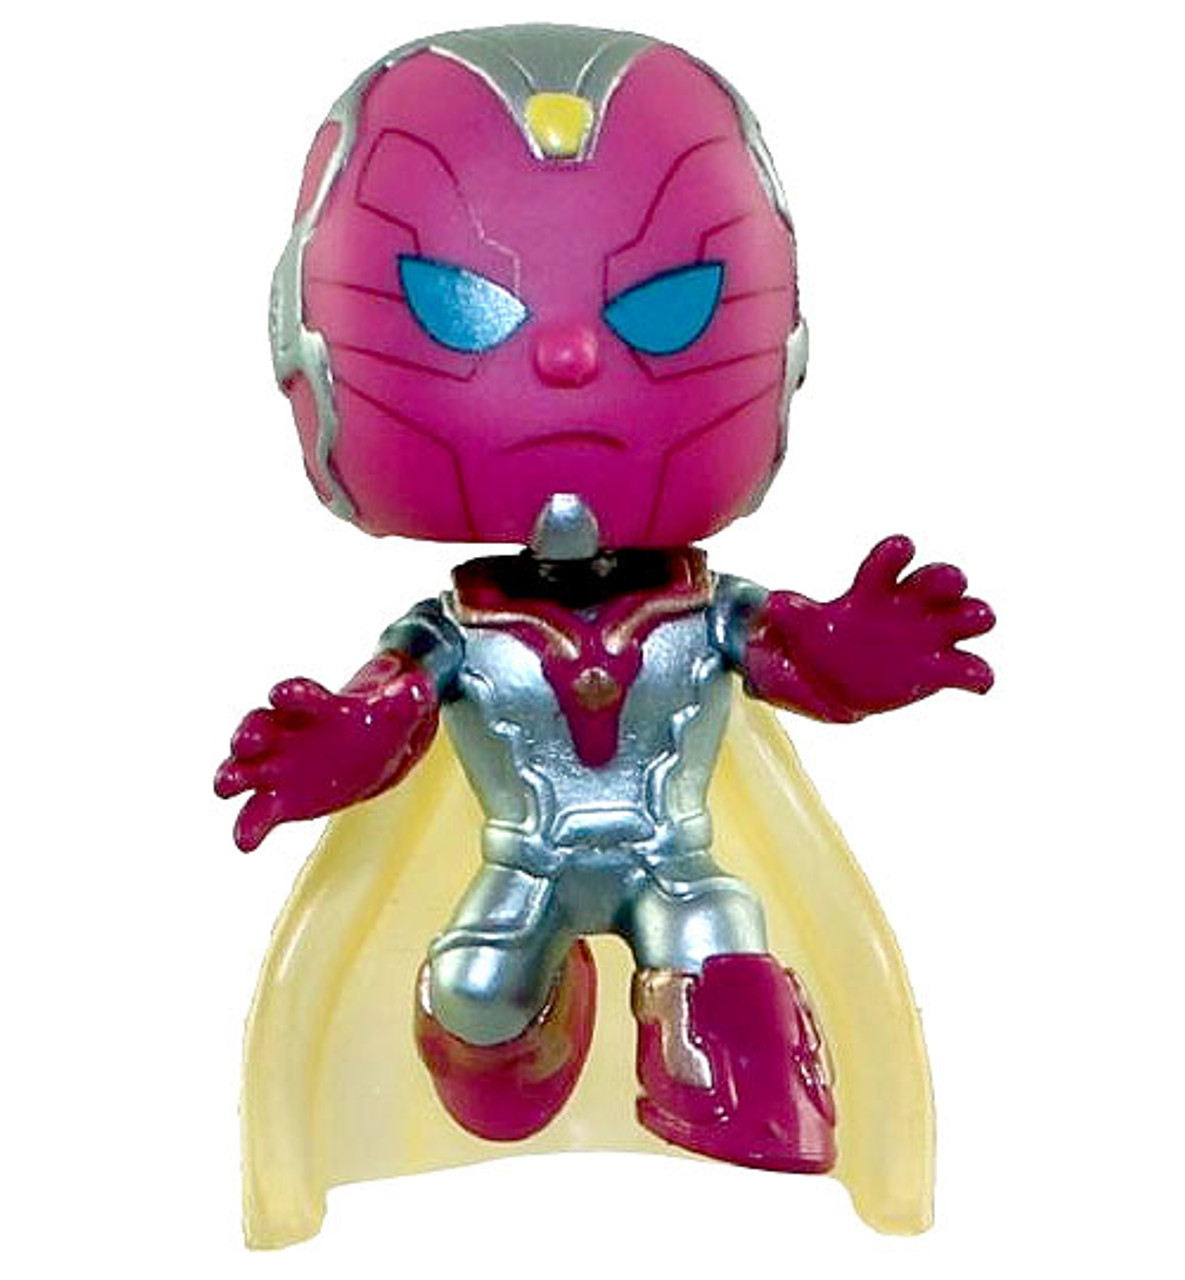 vision 12 inch action figure